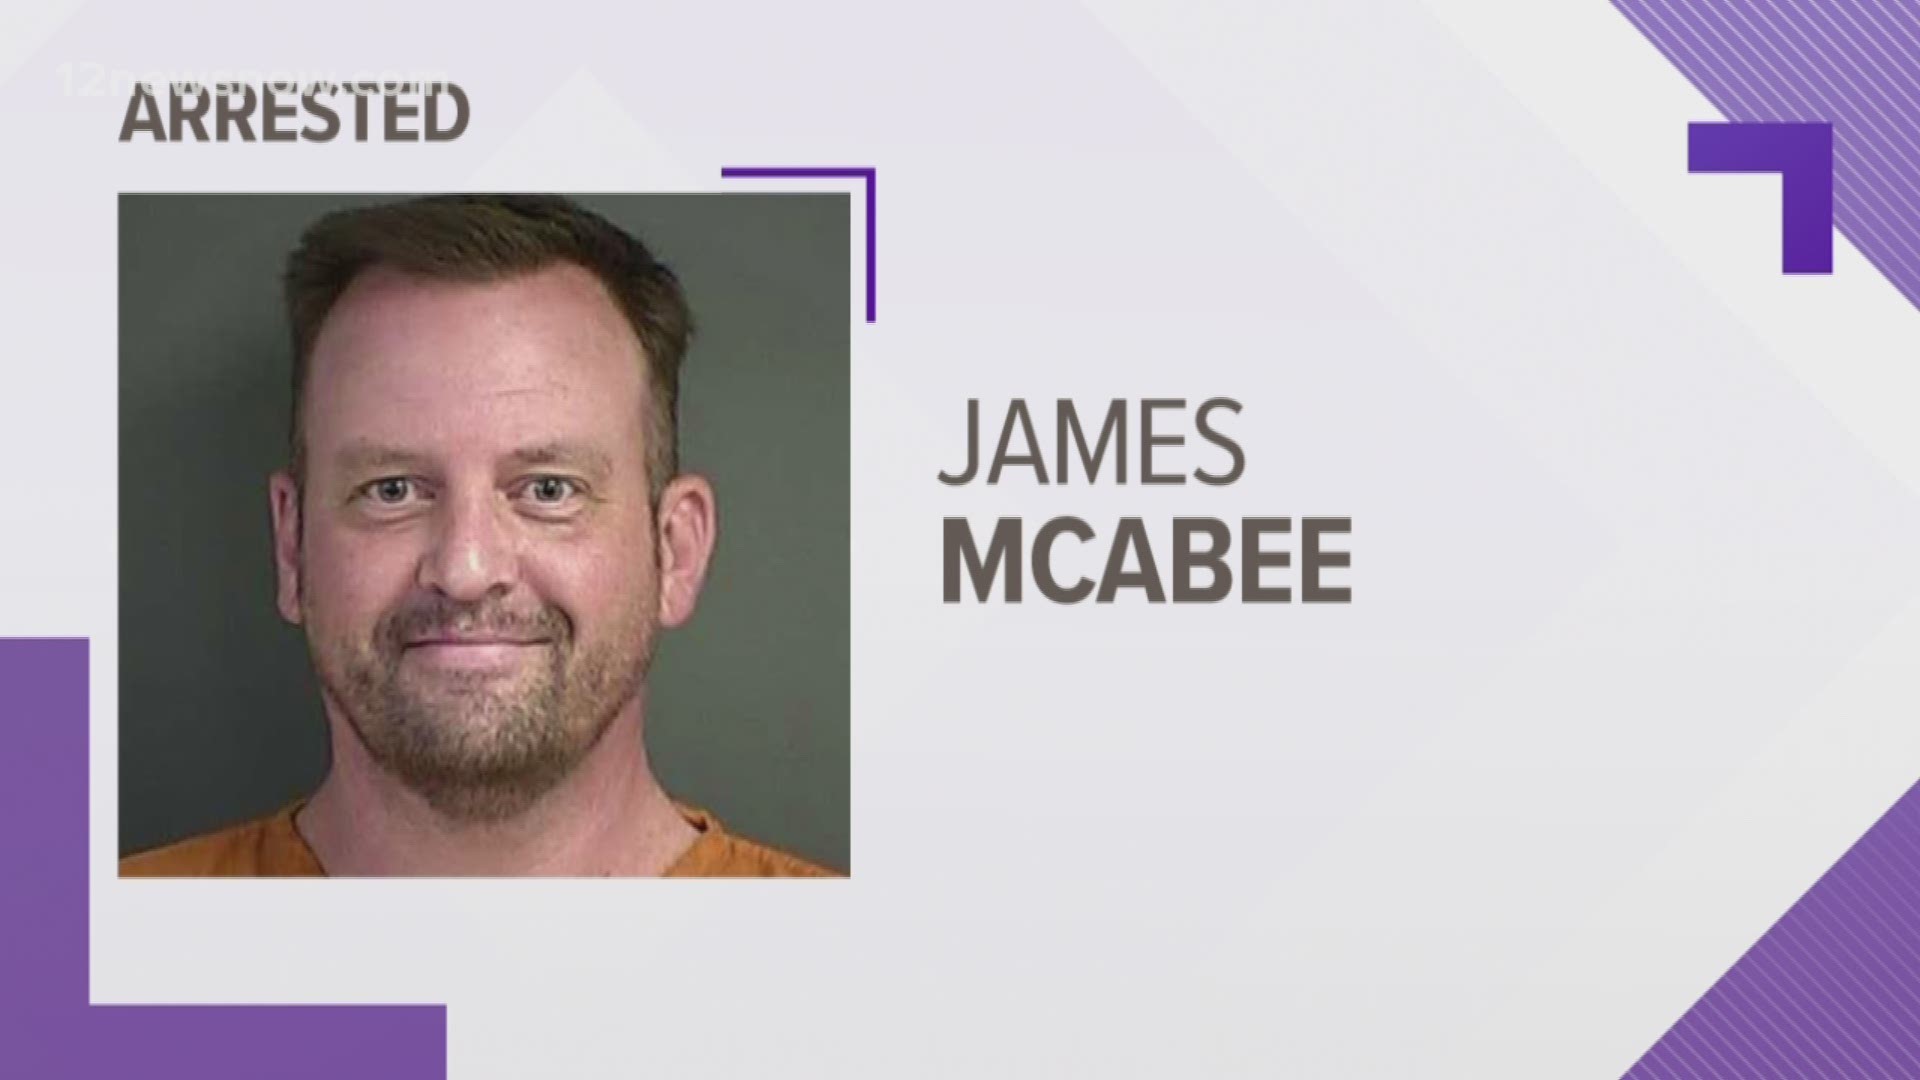 In 2014, he pleaded no contest to drug charges in Beaumont.